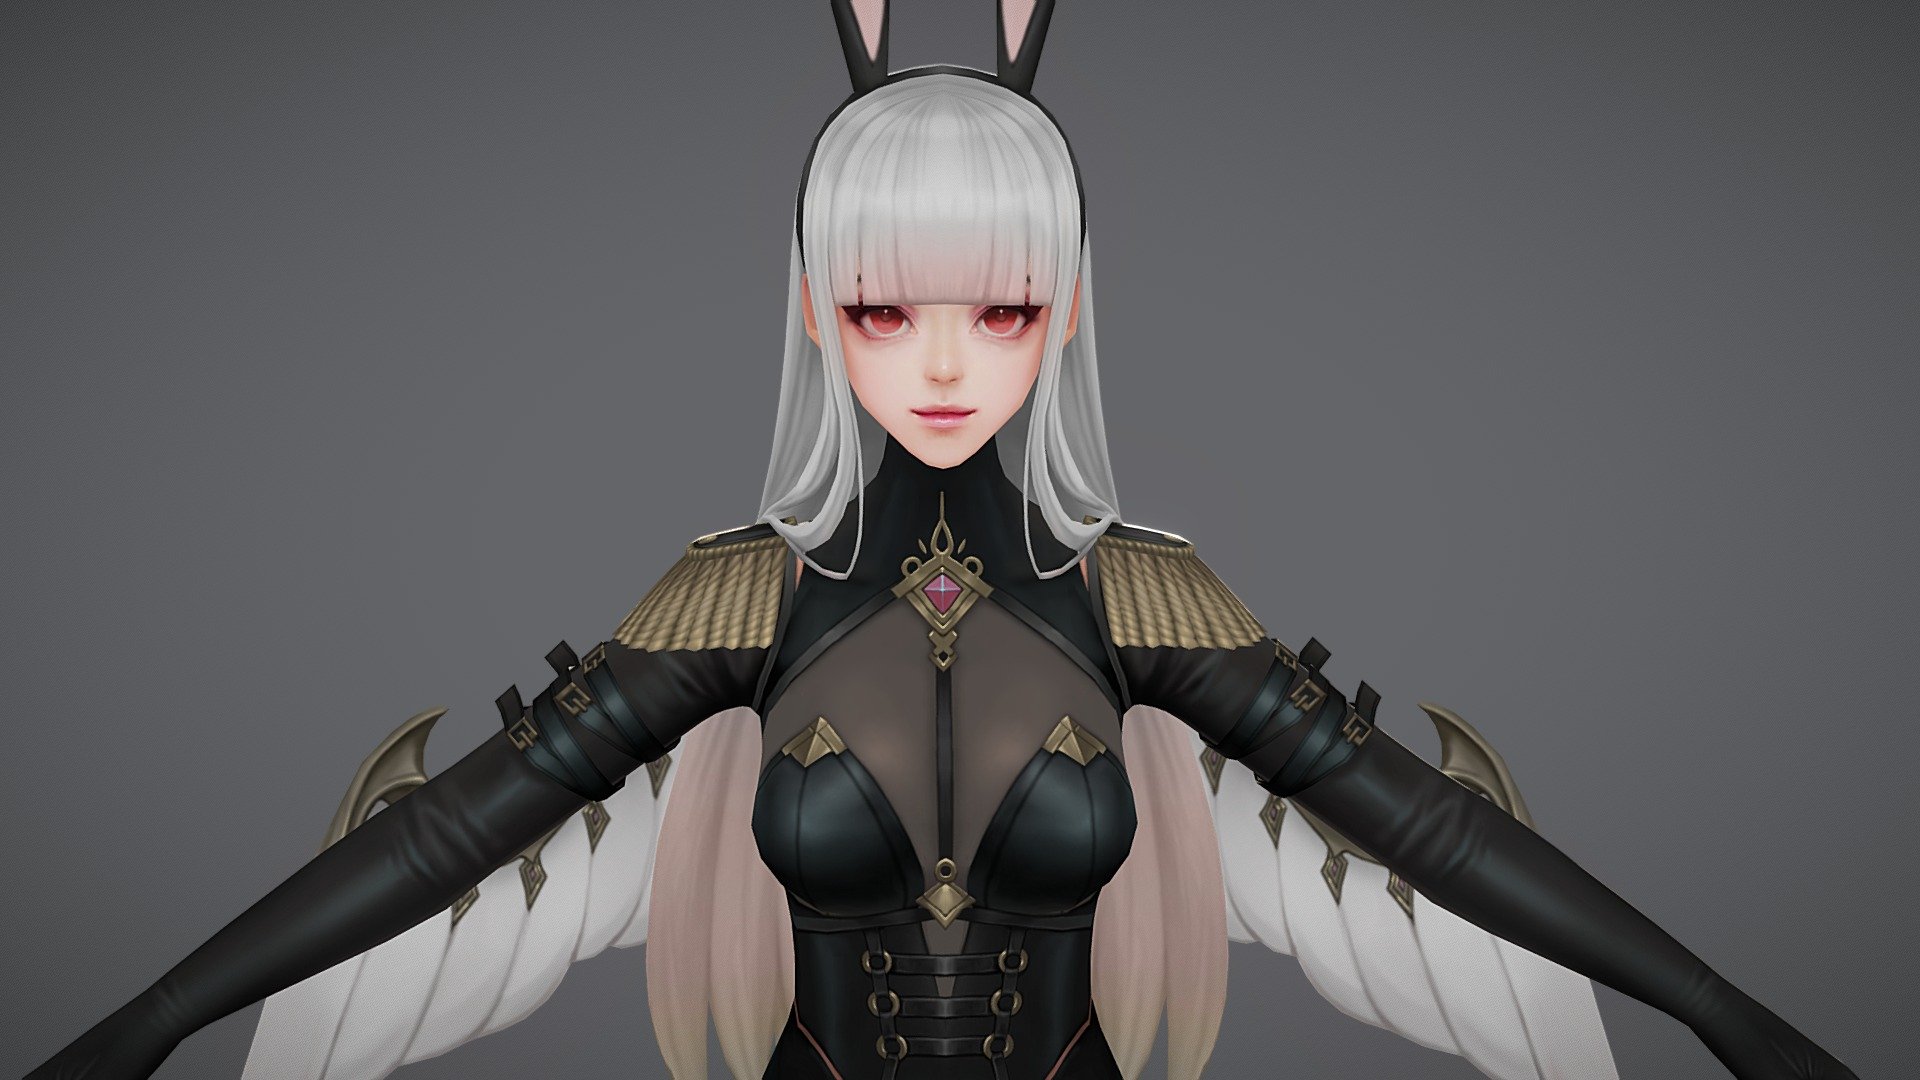 Hello

I worked on goddess modeling and texturing in the DragonSky project. You may refer to the modeling, but commercial use is not allowed.
Thank you.

안녕하세요.

저는 드래곤스카이 프로젝트에서 여신의 모델링과 텍스처링을 했습니다.
모델링을 참고하실 수는 있지만, 상업적 사용은 허용되지 않습니다.
감사합니다.

ⓒ 2018. (NovaCore) all rights reserved 3d model